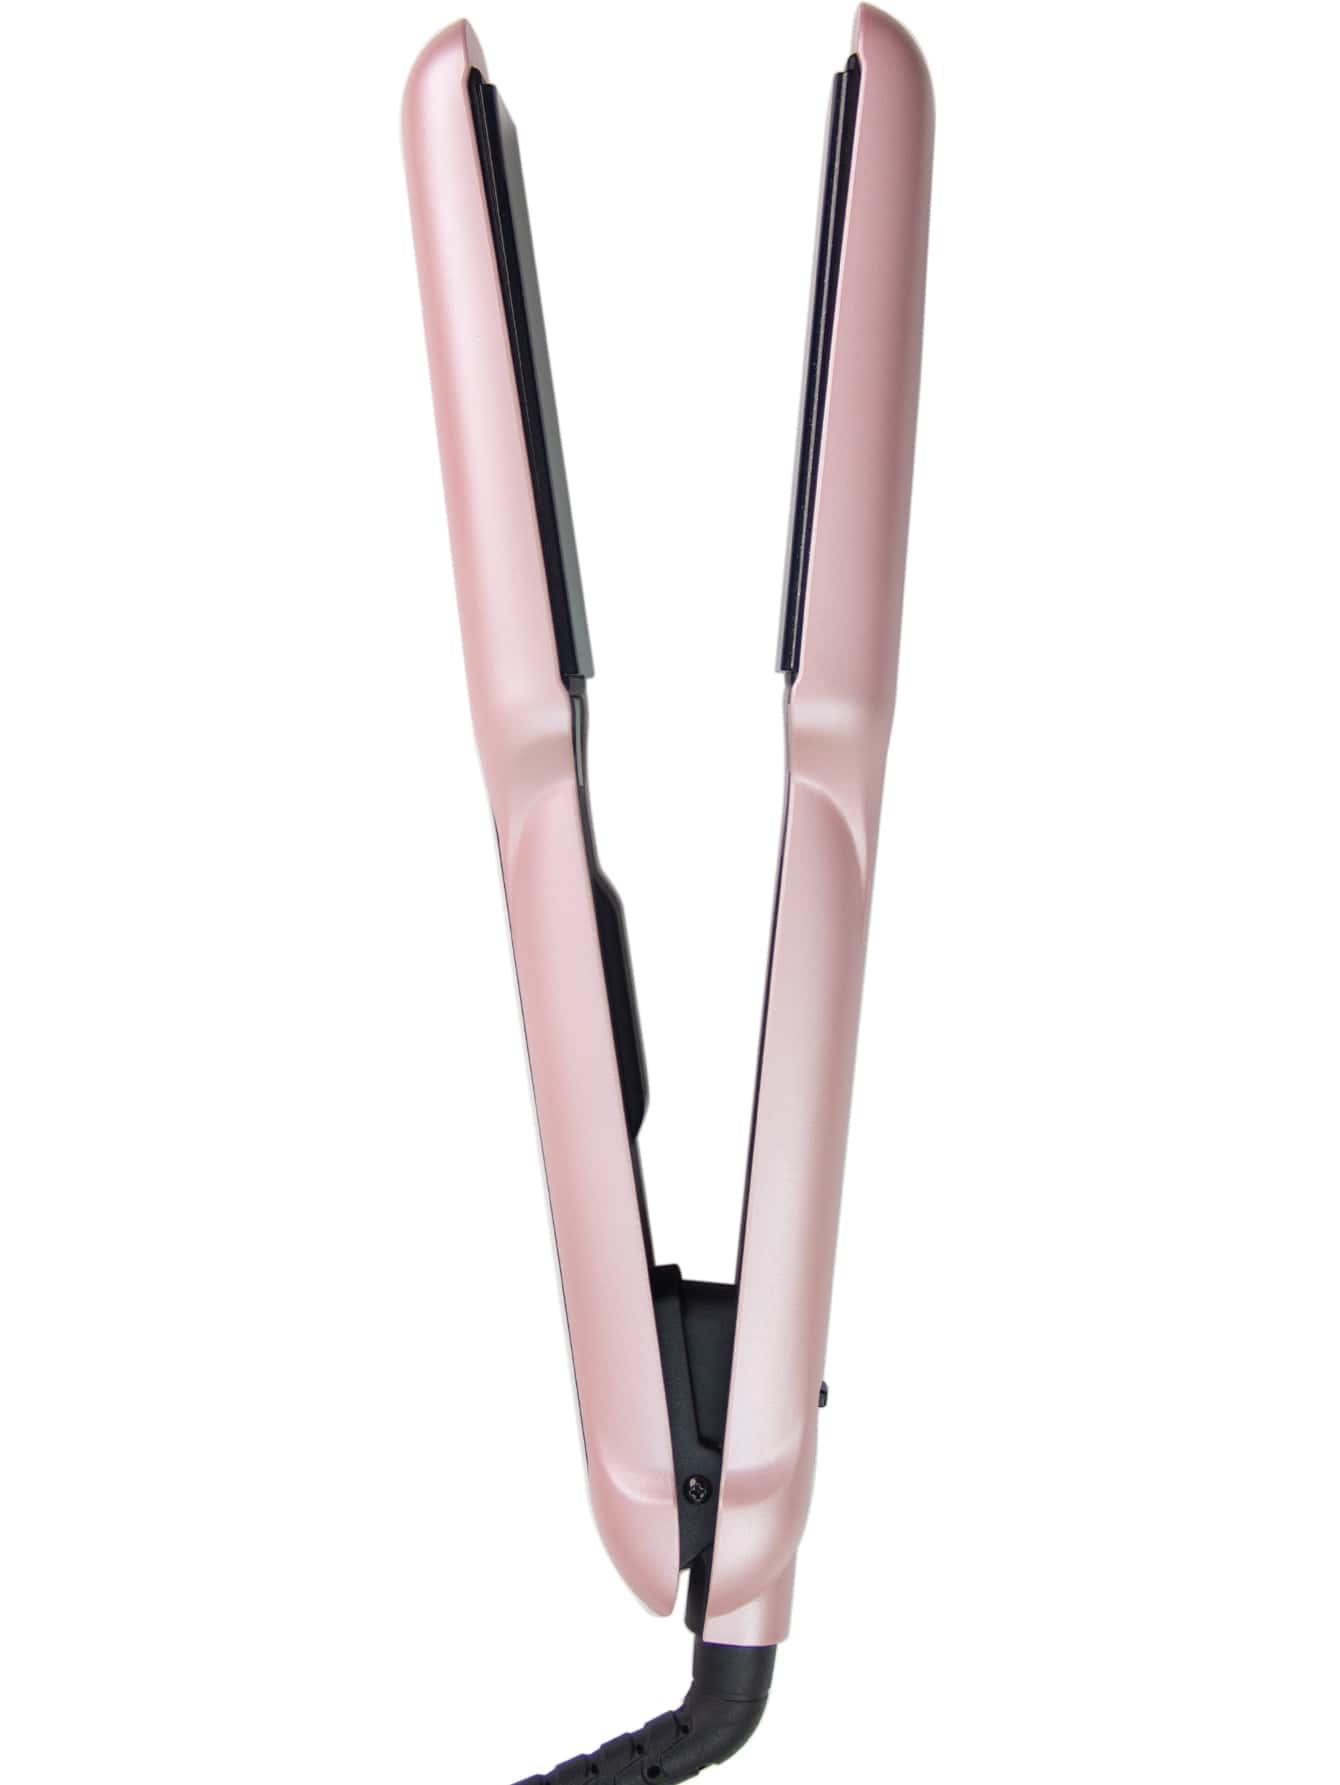 (AU)ANGENIL Argan Oil Flat Iron Curling Iron in One, Professional Portable Dual Voltage Ceramic Hair Straightener, 1.6 Inch Wide Flat Iron for Thick Hair, Fast Straightening Styling, LCD Display-Pink-2